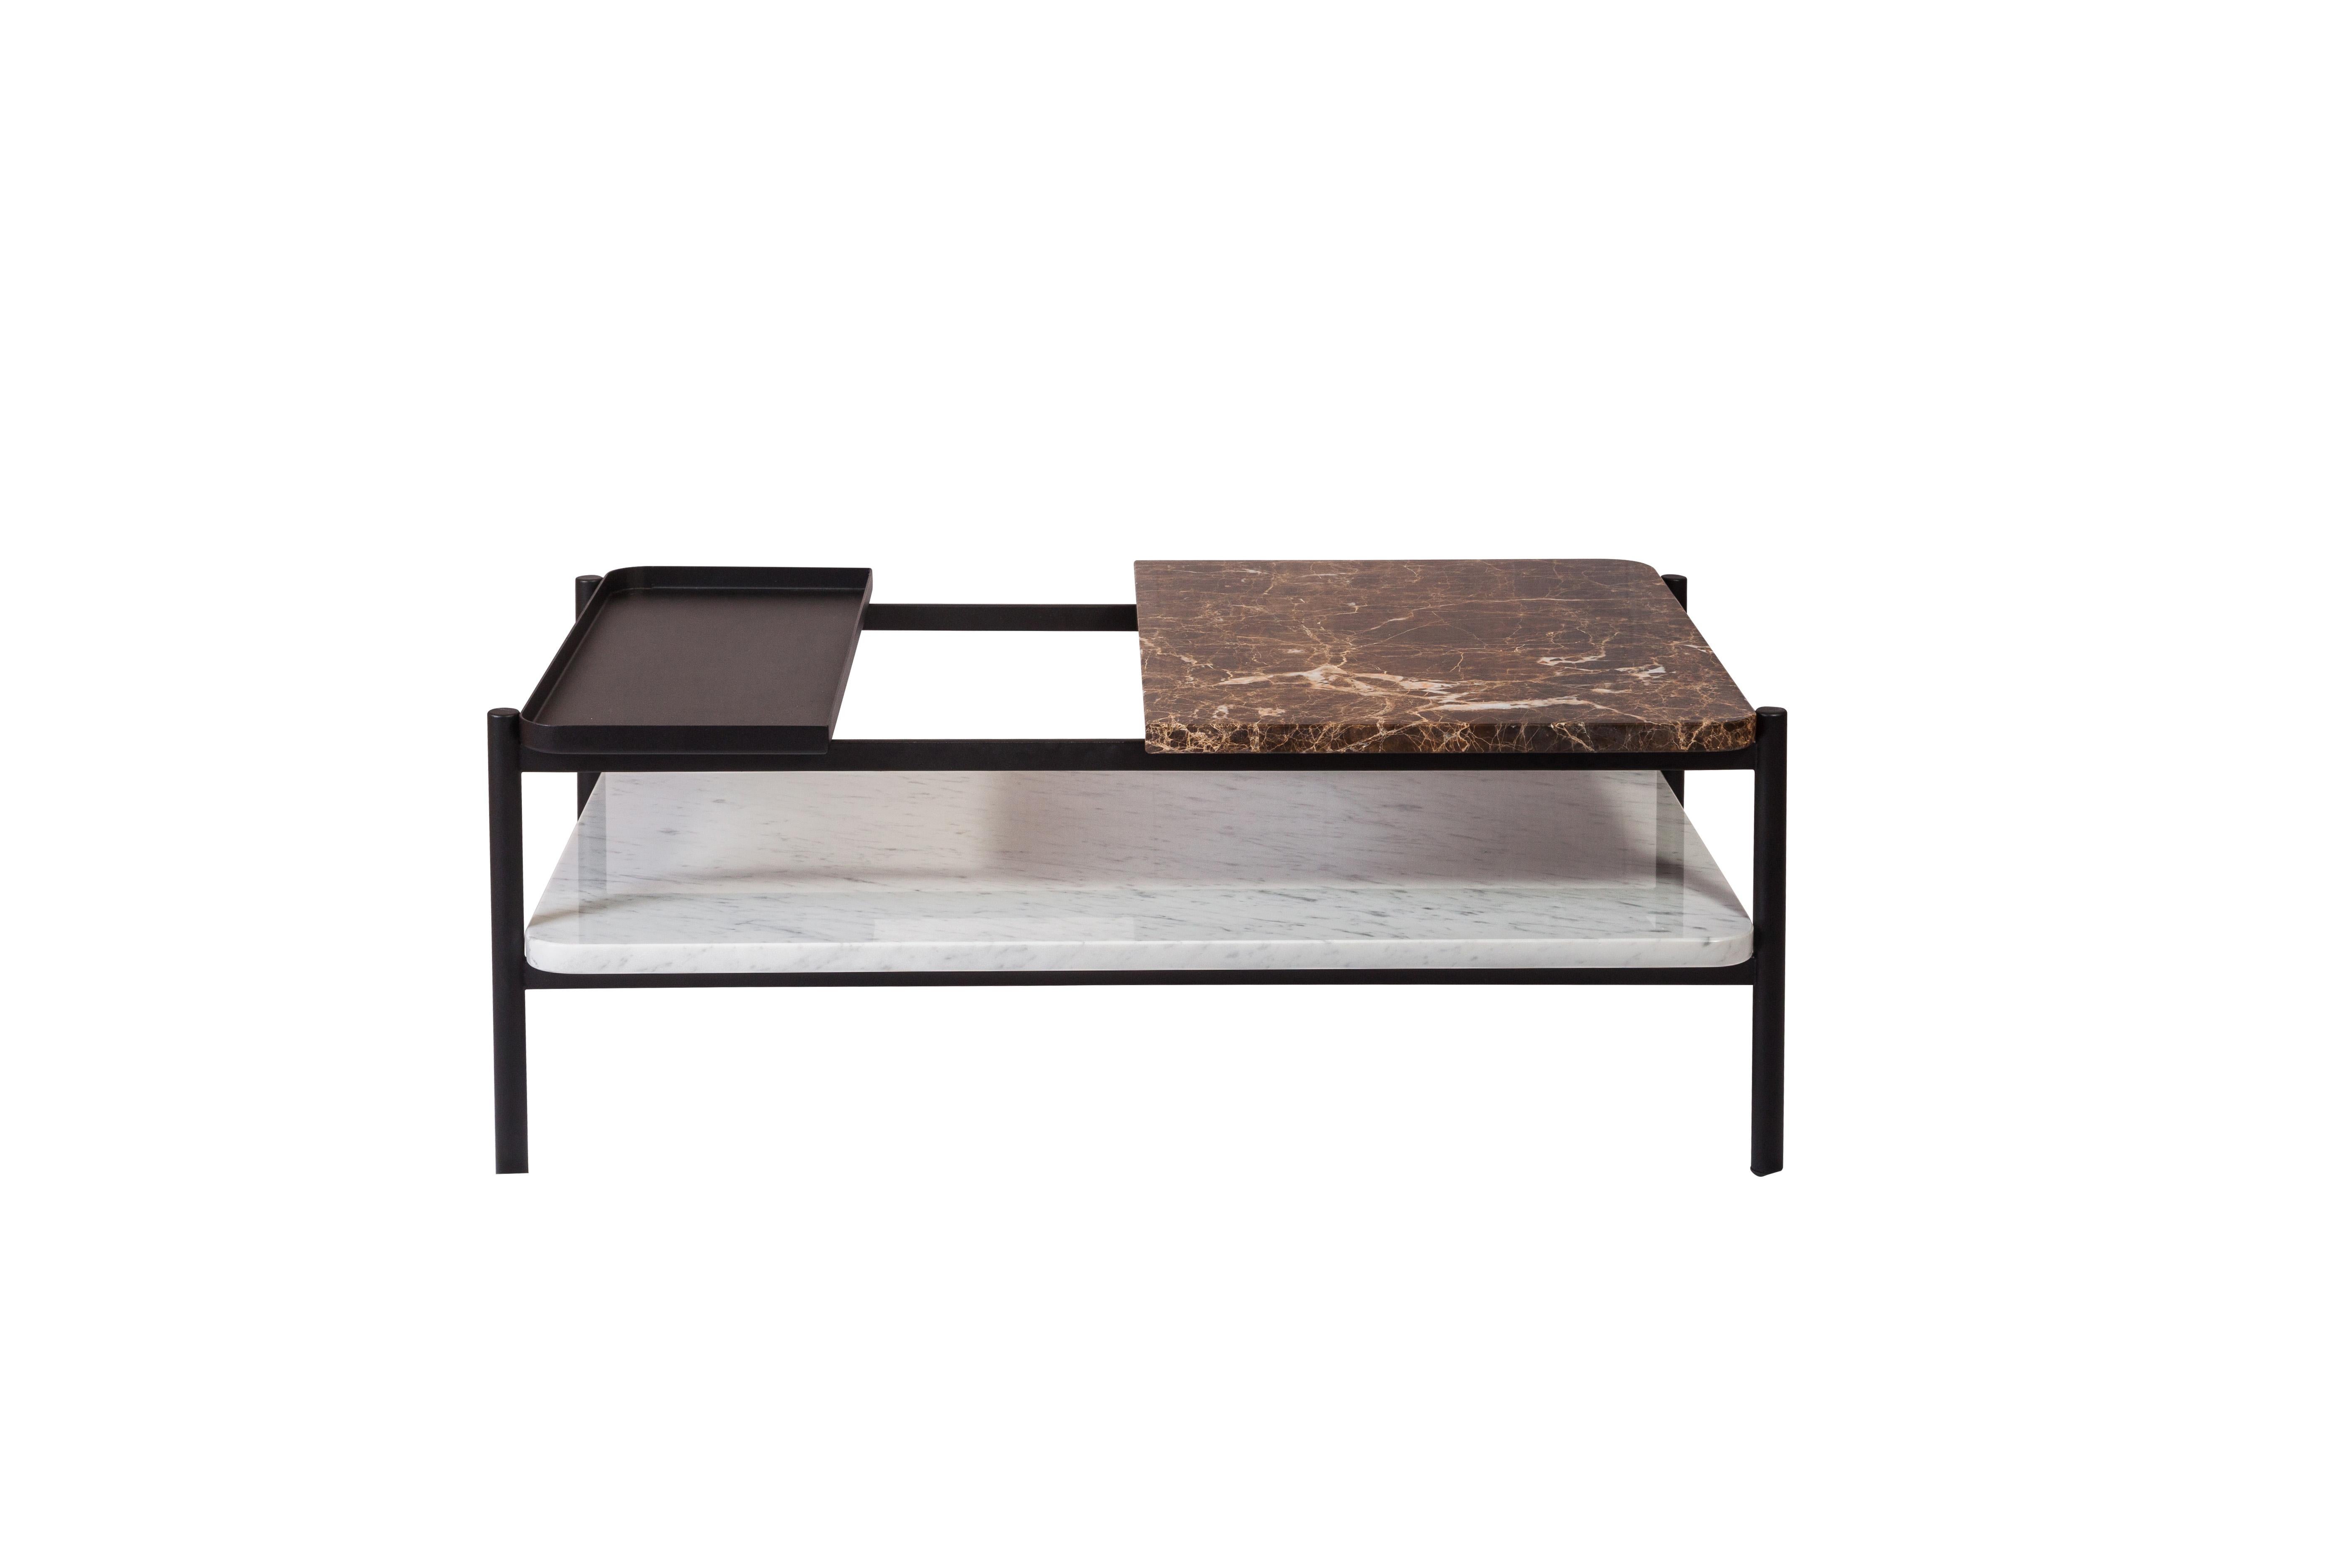 Bagnères Coffee Table Emperador 'Brown' and Marquina 'Black' Marble and Metal In Excellent Condition For Sale In Arudy, Aquitaine